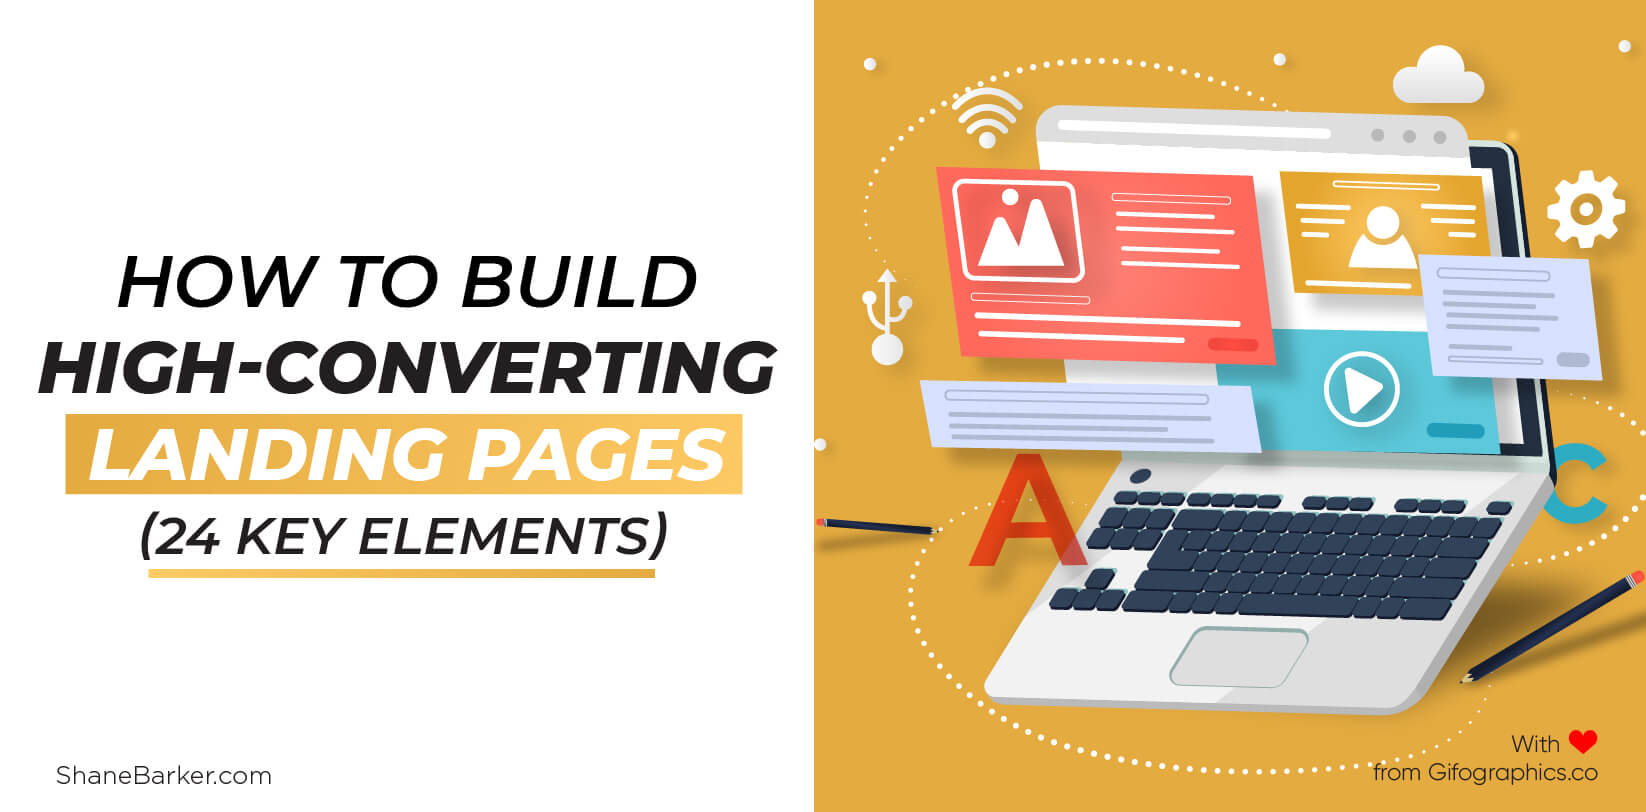 How to Build High-Converting Landing Pages (24 Key Elements)